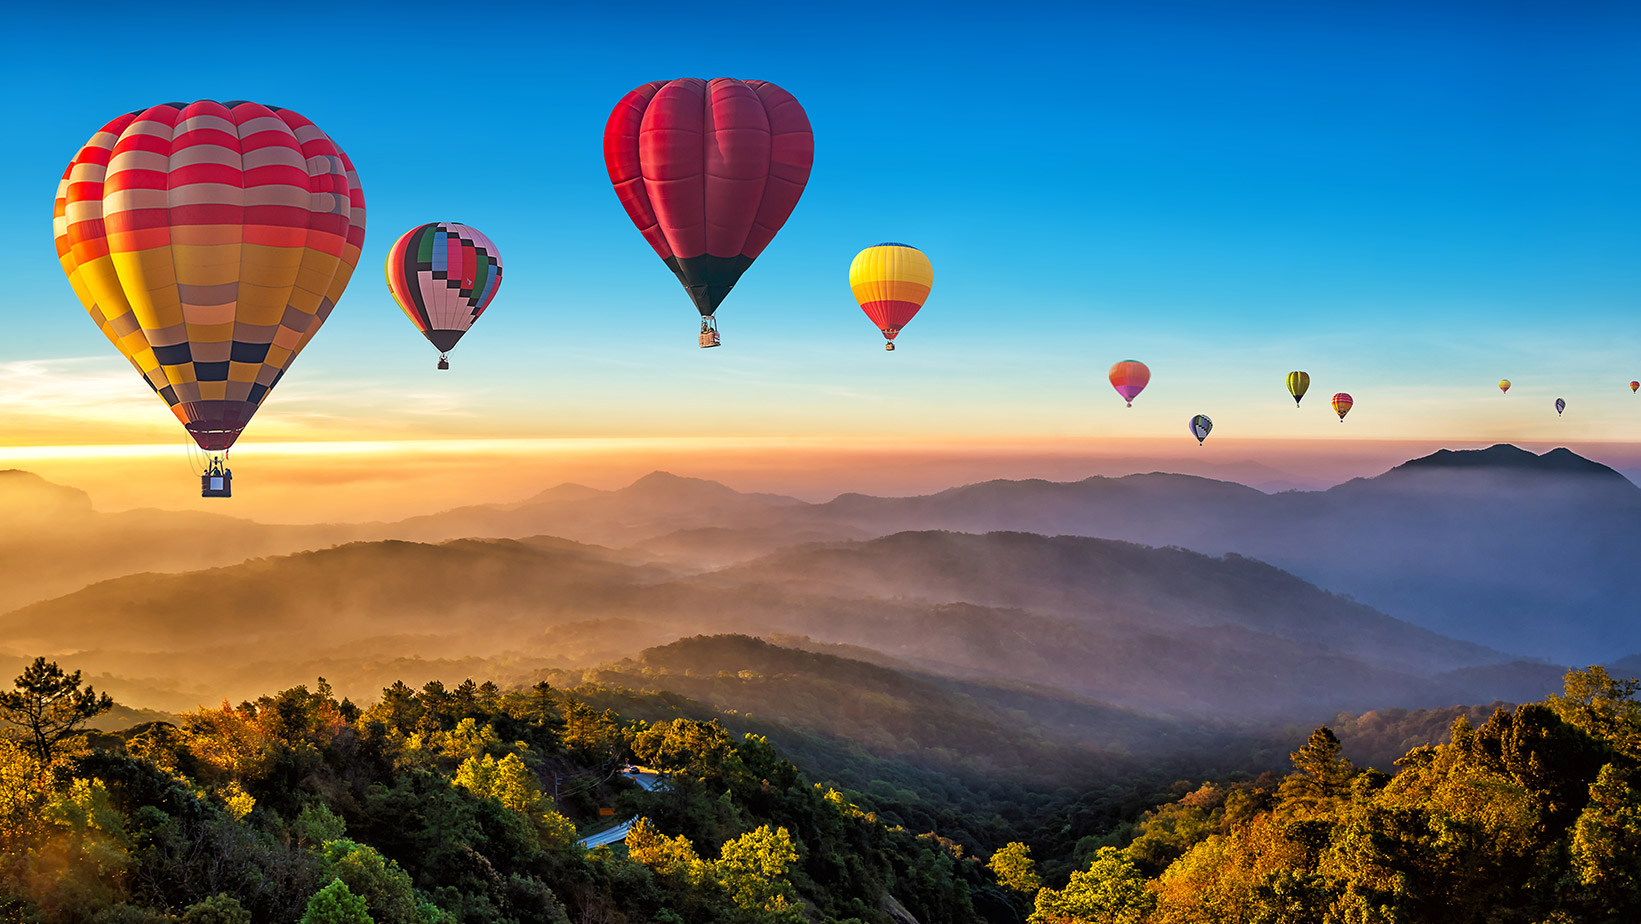 Image of colorful air balloons over nice scenery